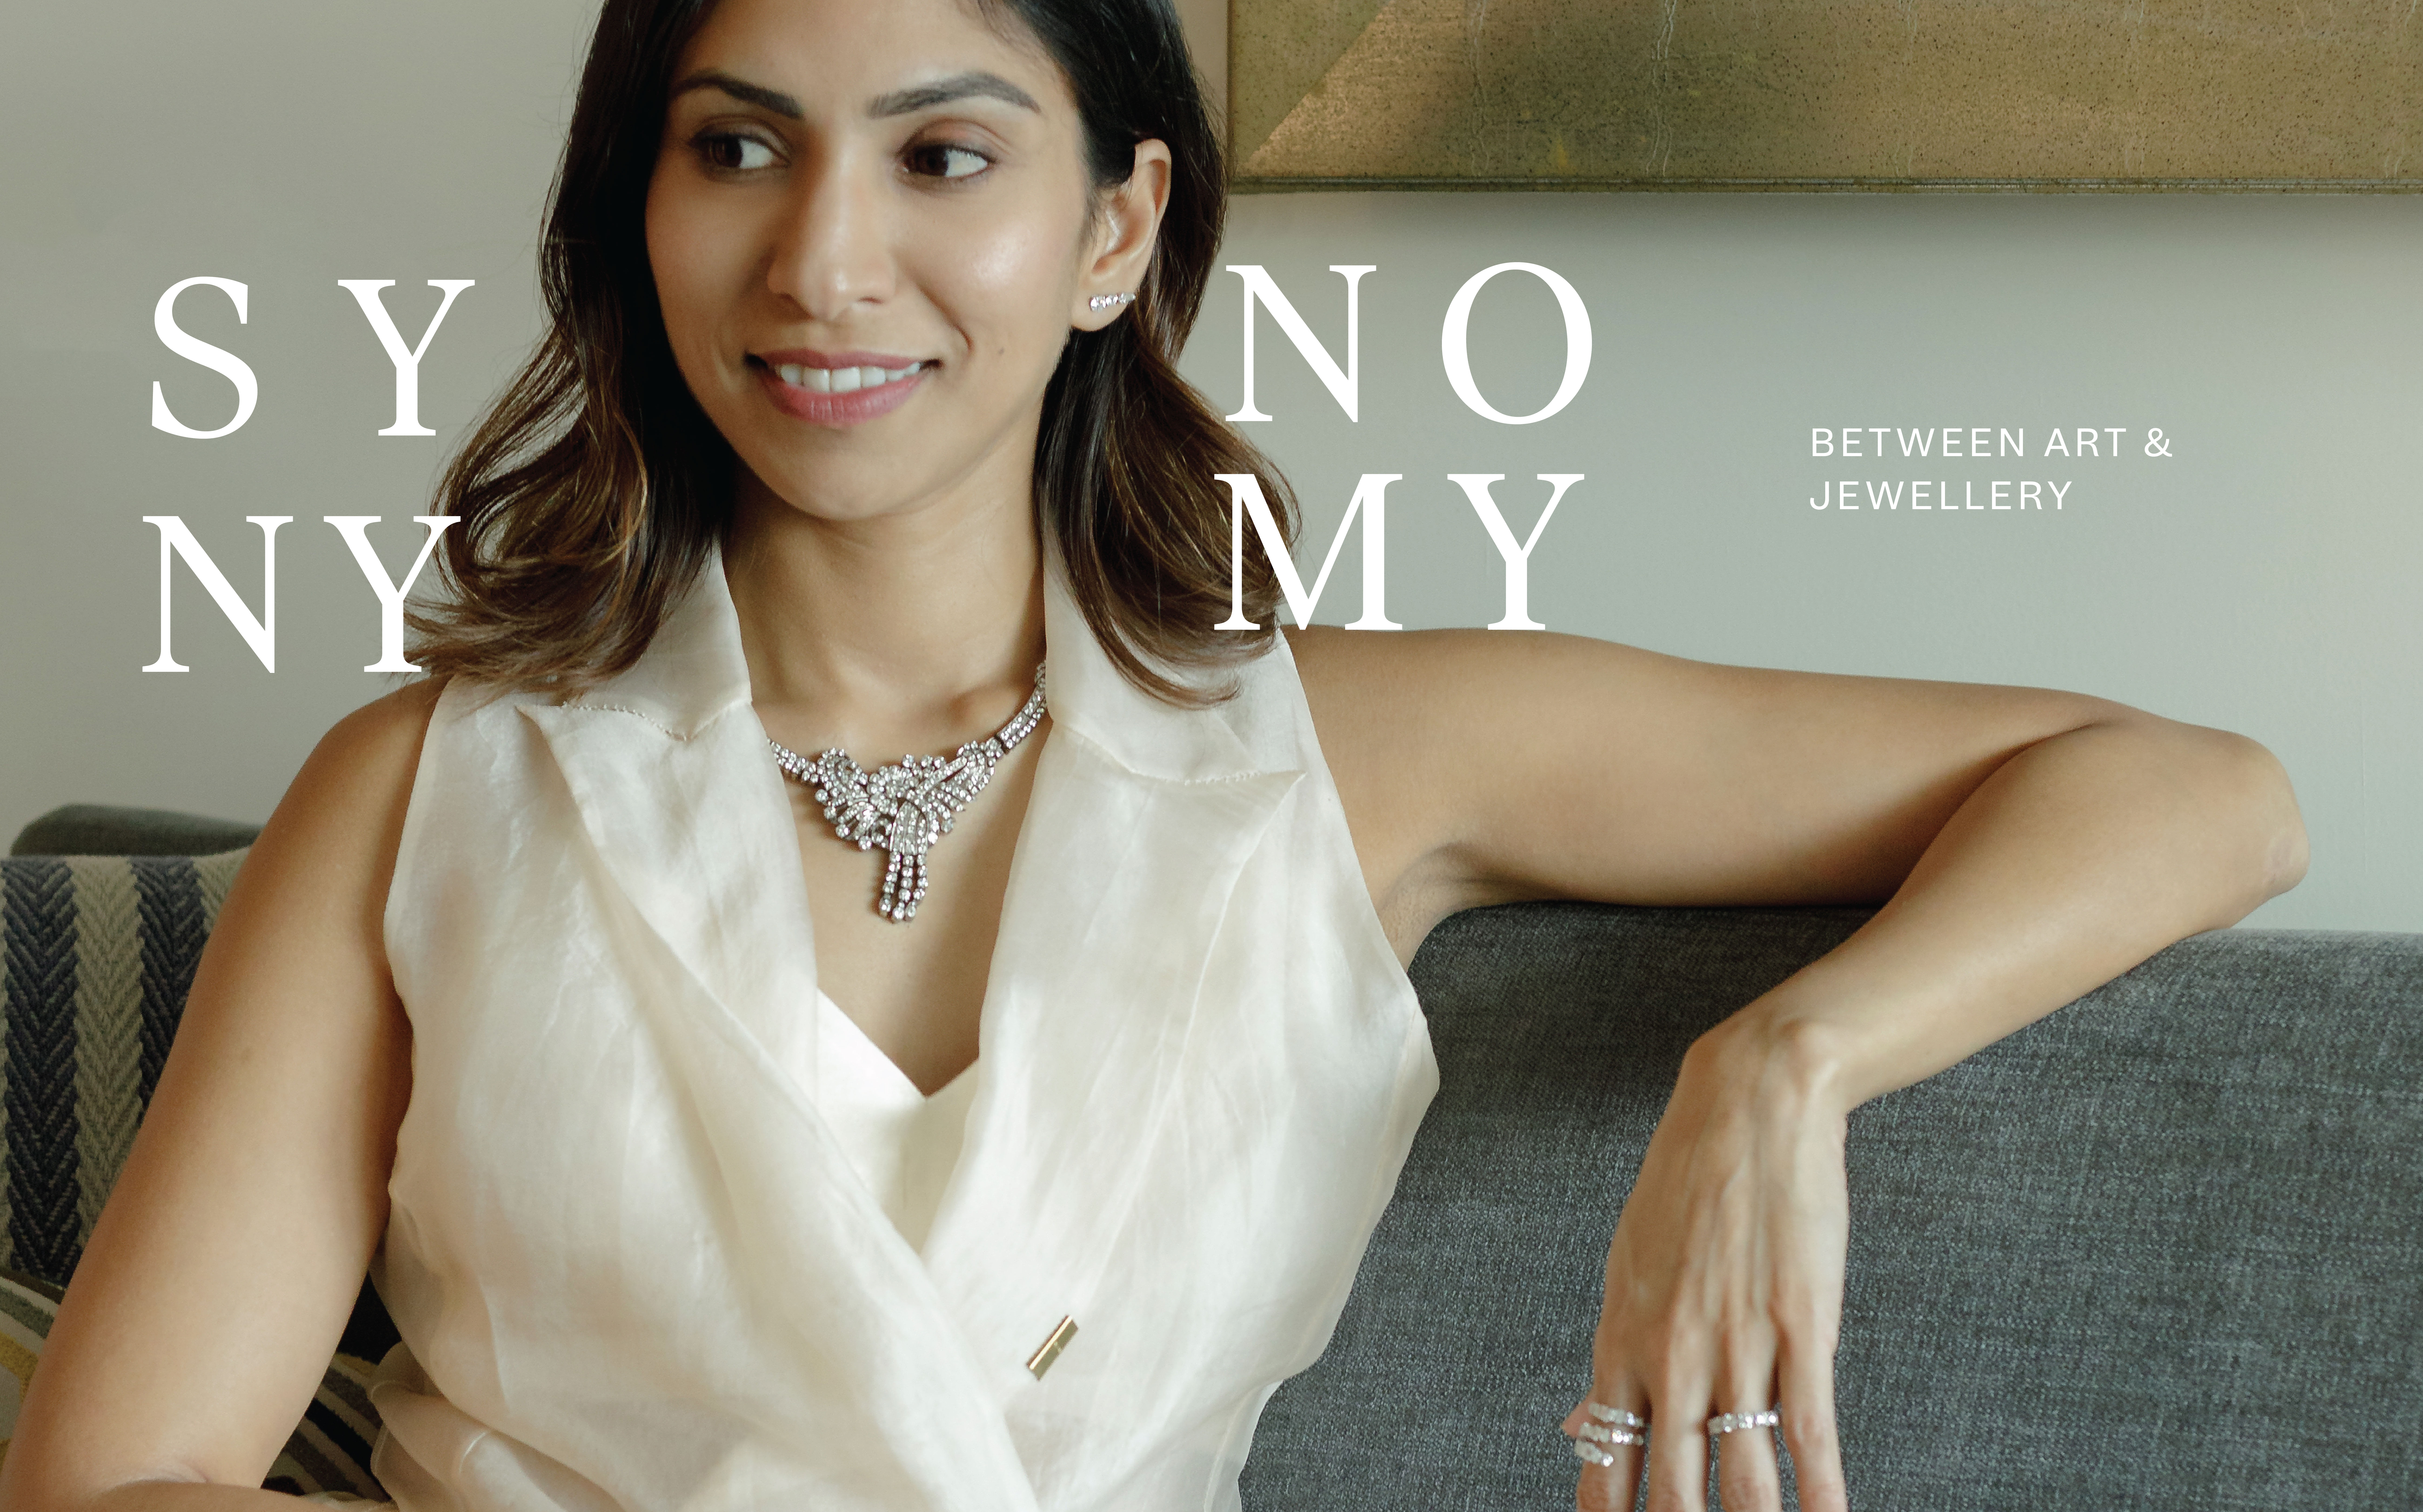 Arundhati De-Sheth explores the synonymy between art and jewellery